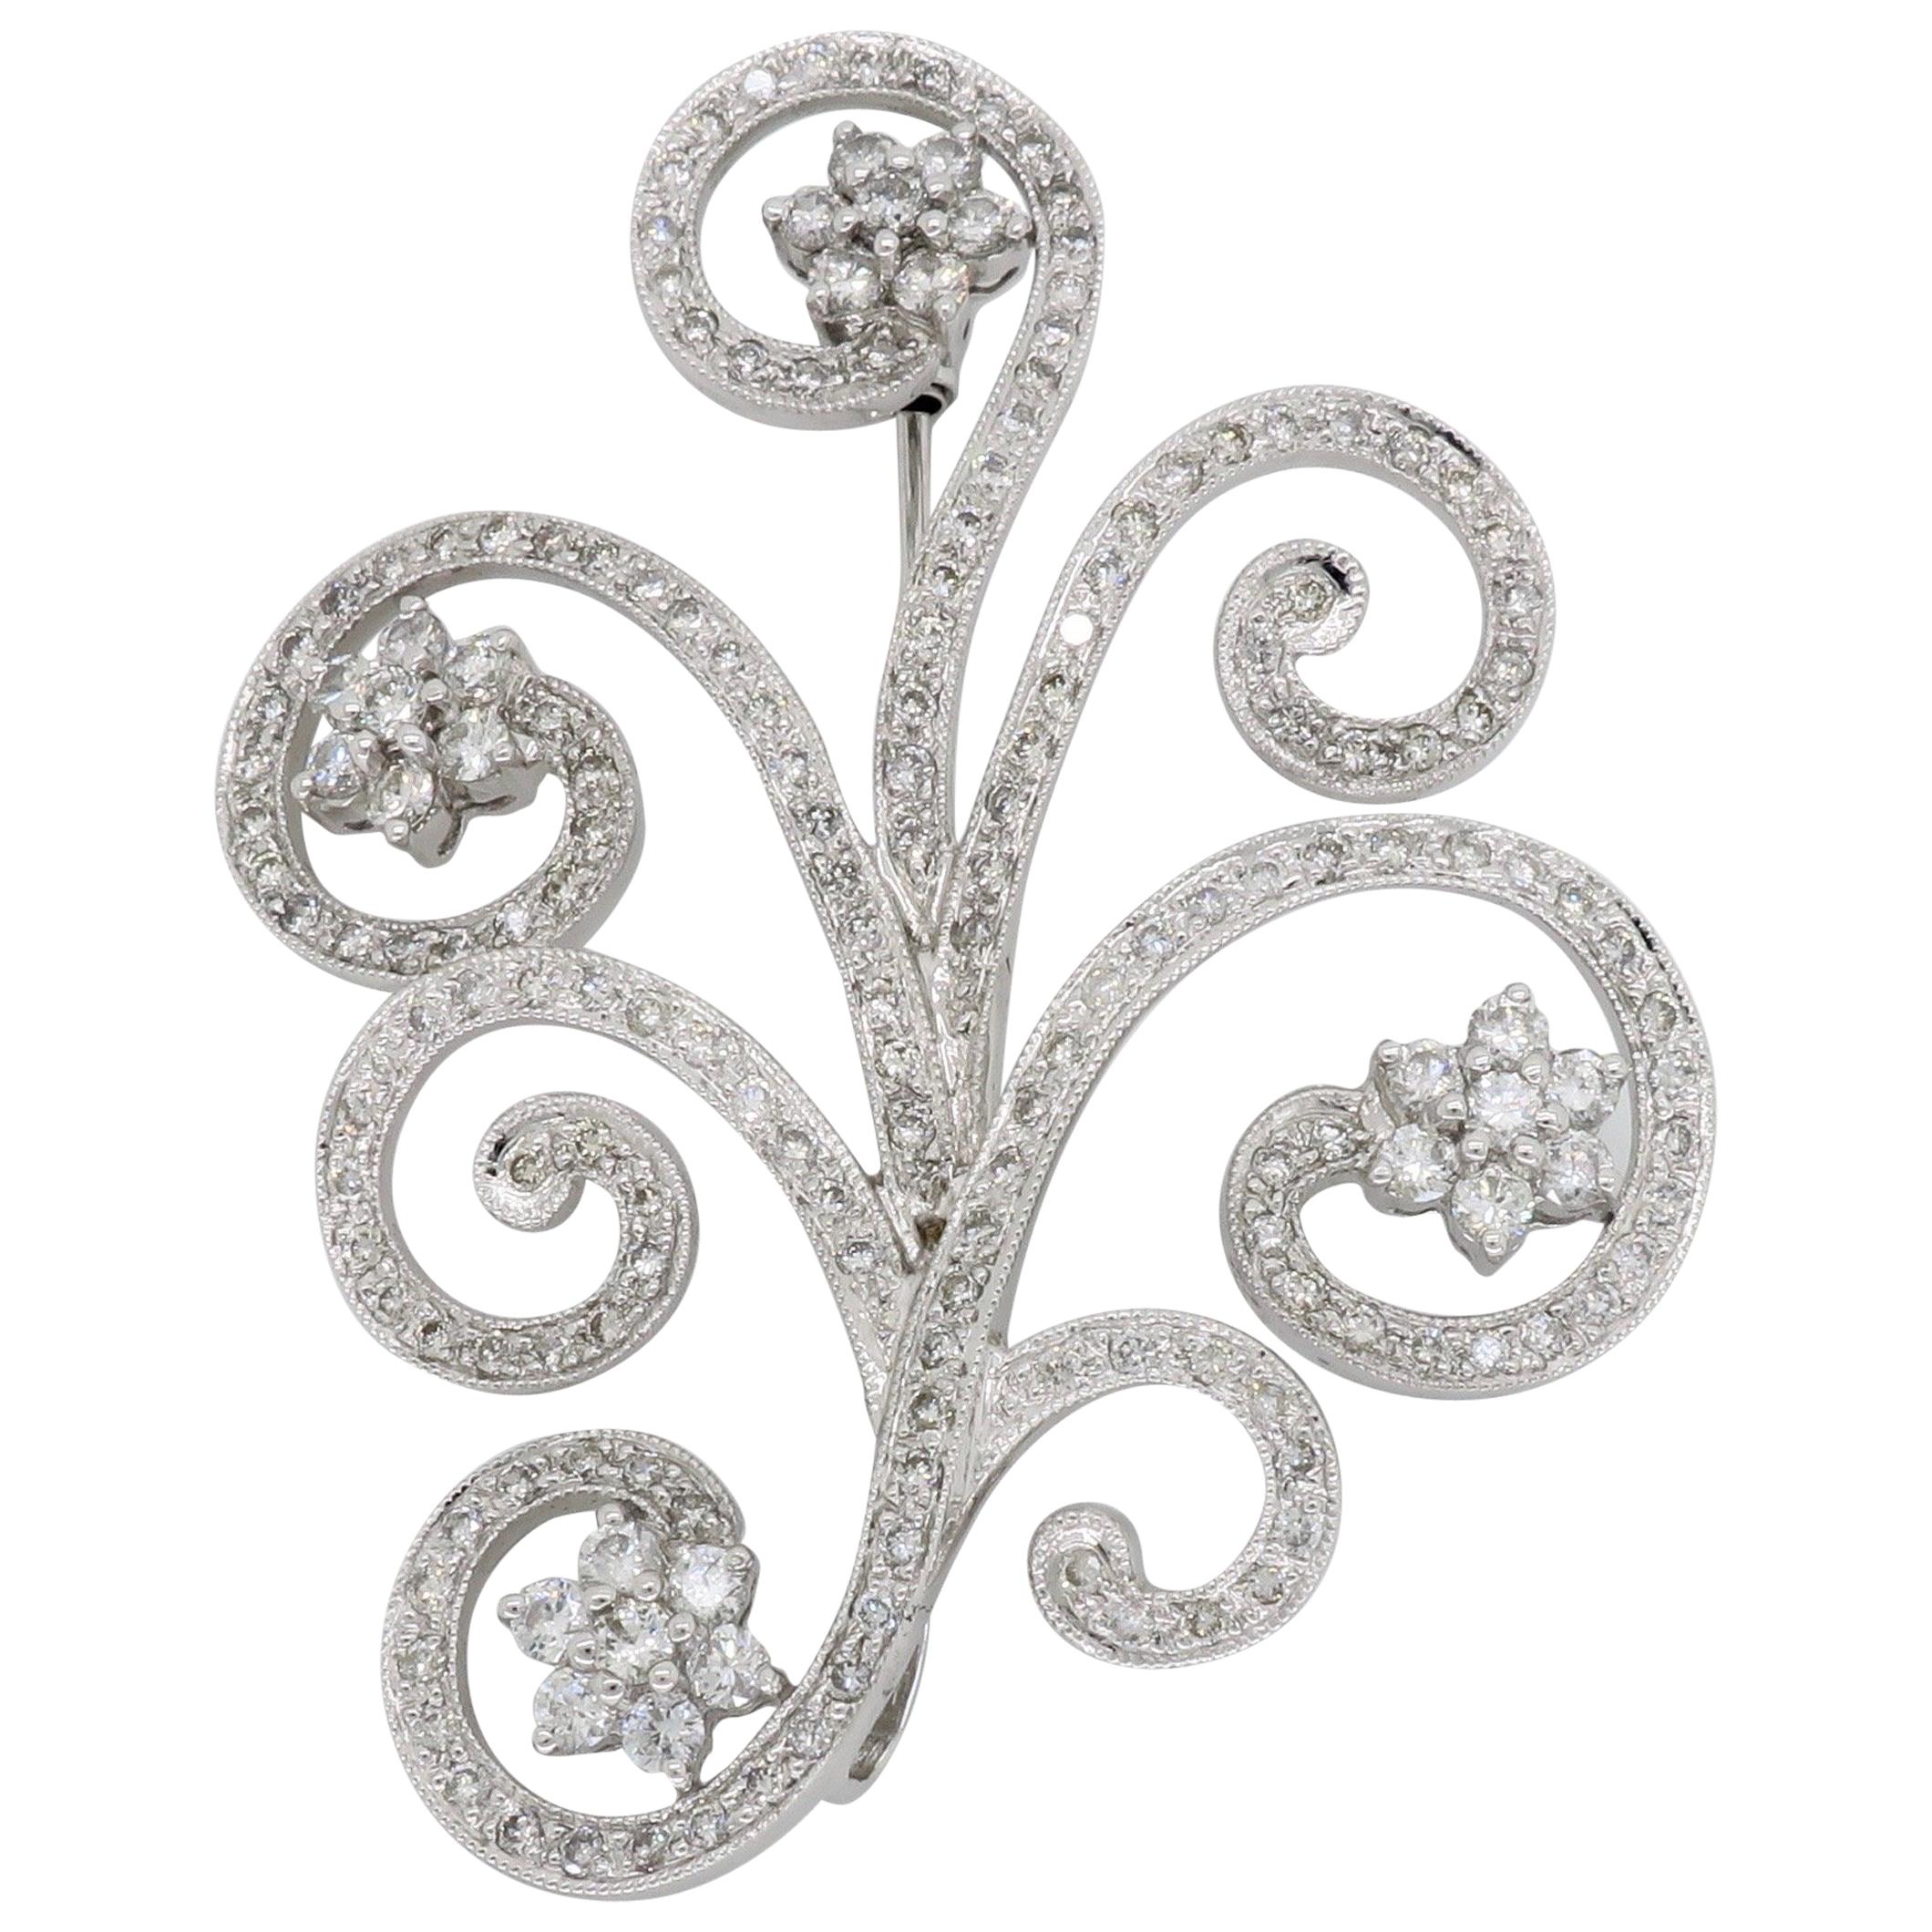 Diamond Floral Brooch and Pendant